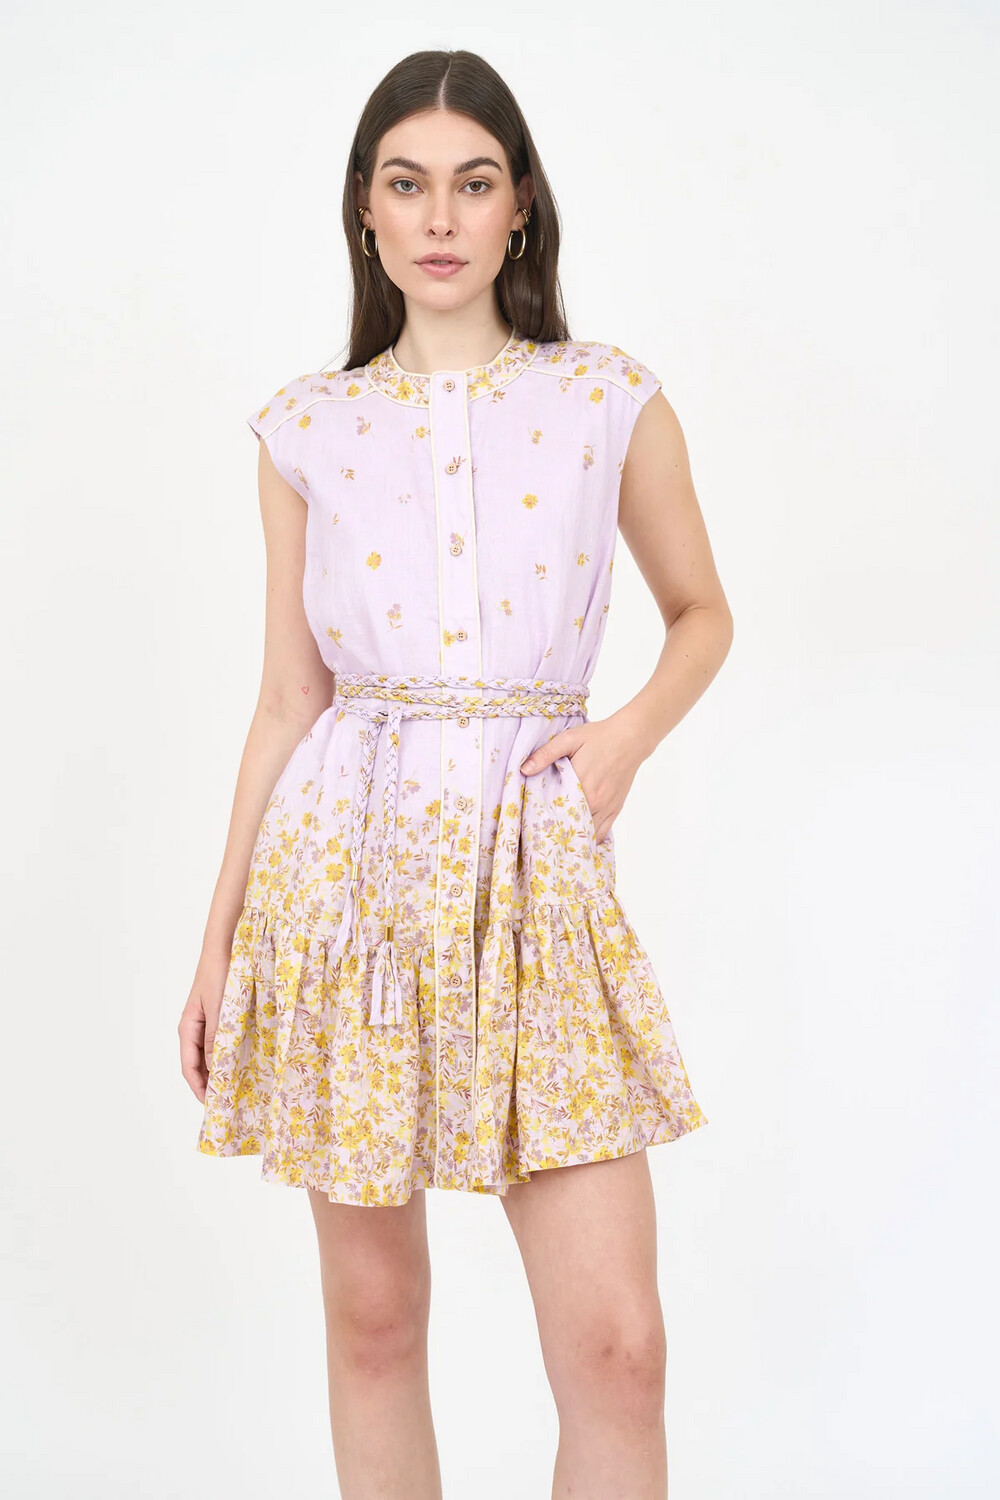 Christy Lynn Lucie Dress in Falling Floral Mauve